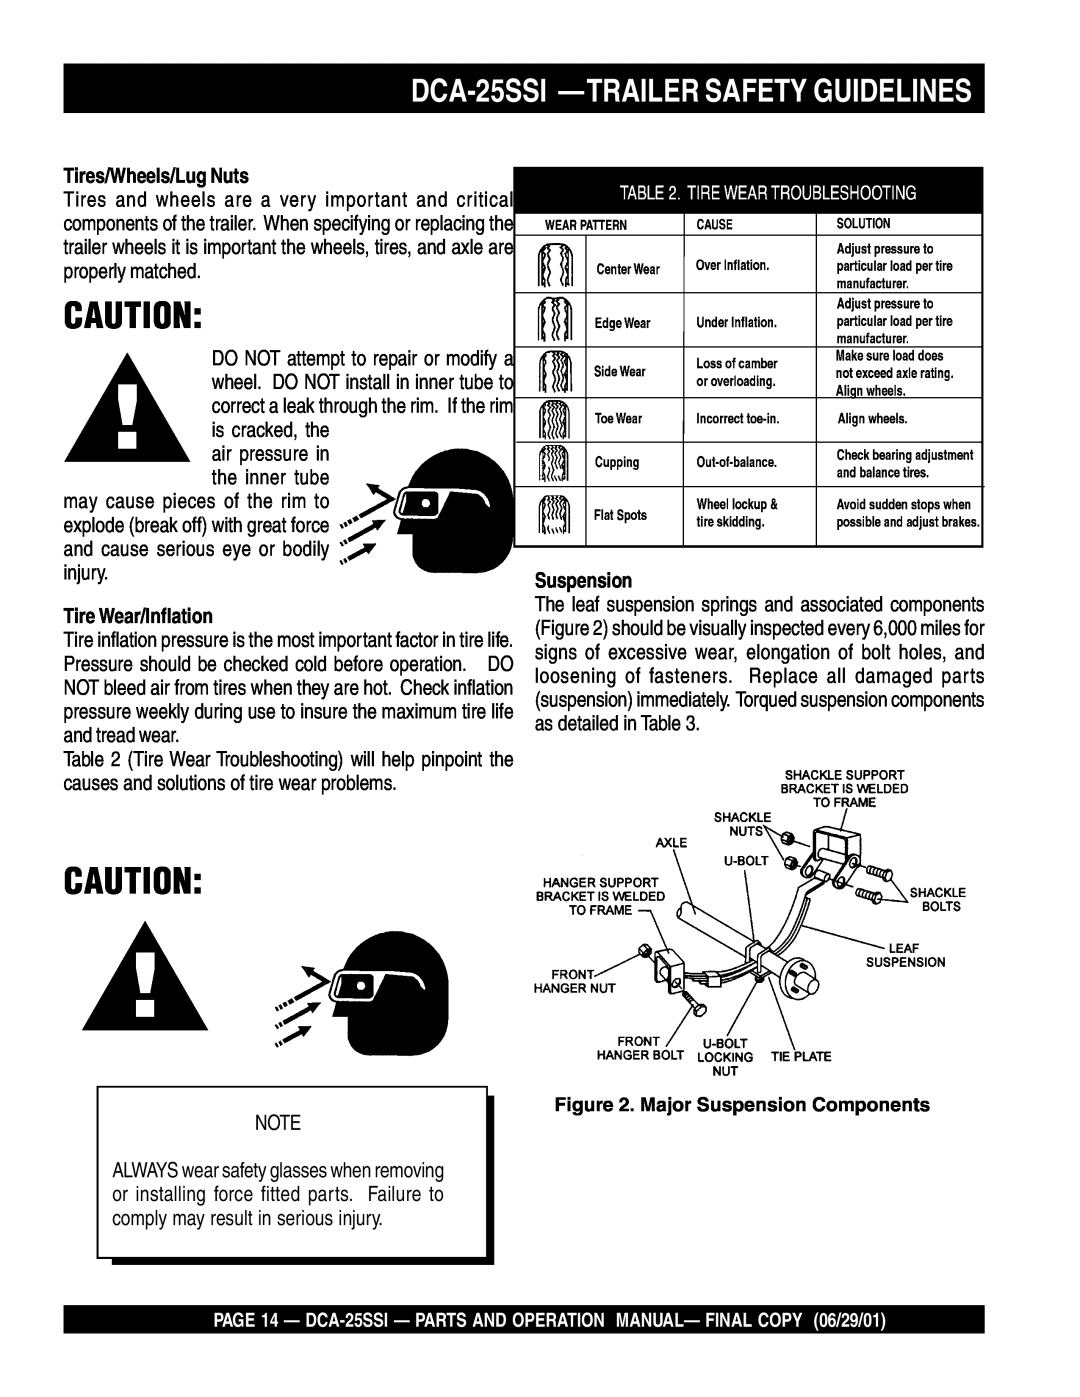 Multiquip operation manual DCA-25SSI —TRAILERSAFETY GUIDELINES, Tires/Wheels/Lug Nuts, Tire Wear/Inflation, Suspension 